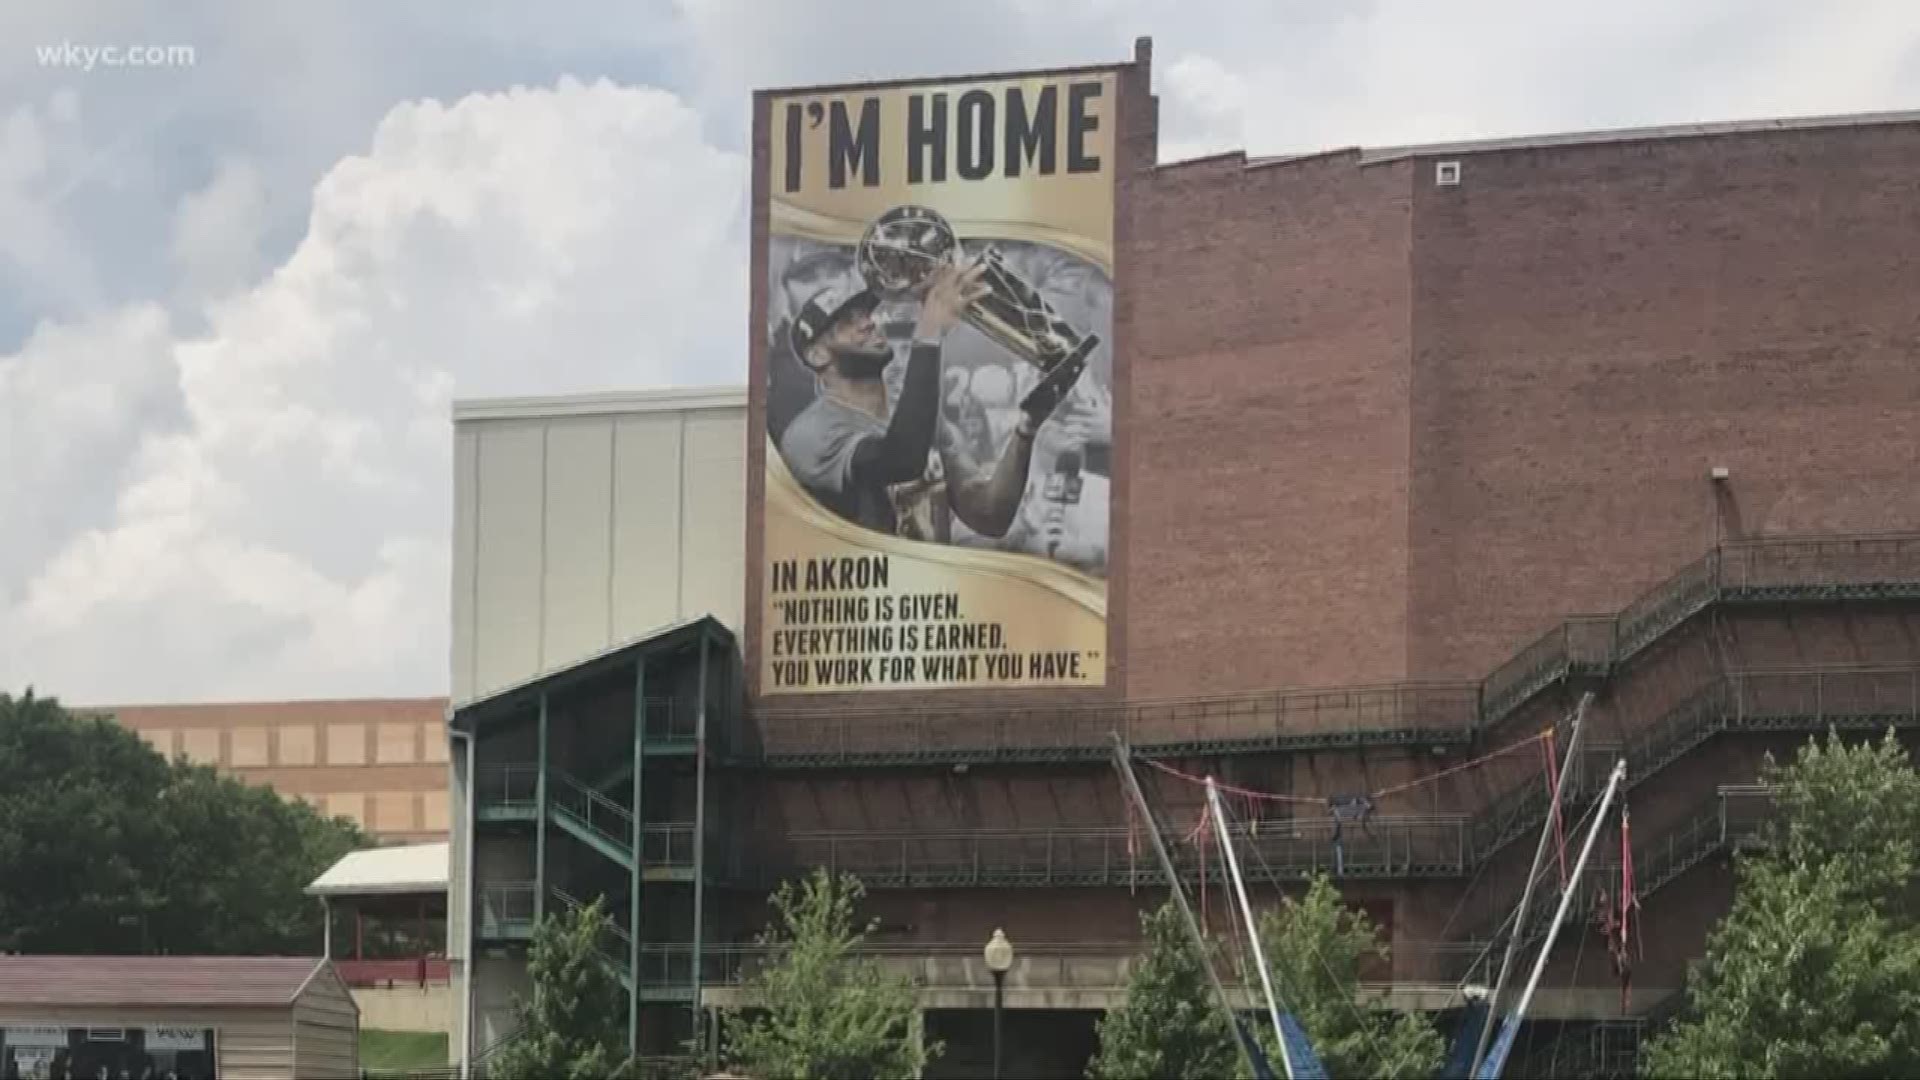 While LeBron James banner in Cleveland is coming down, Akron's will stay